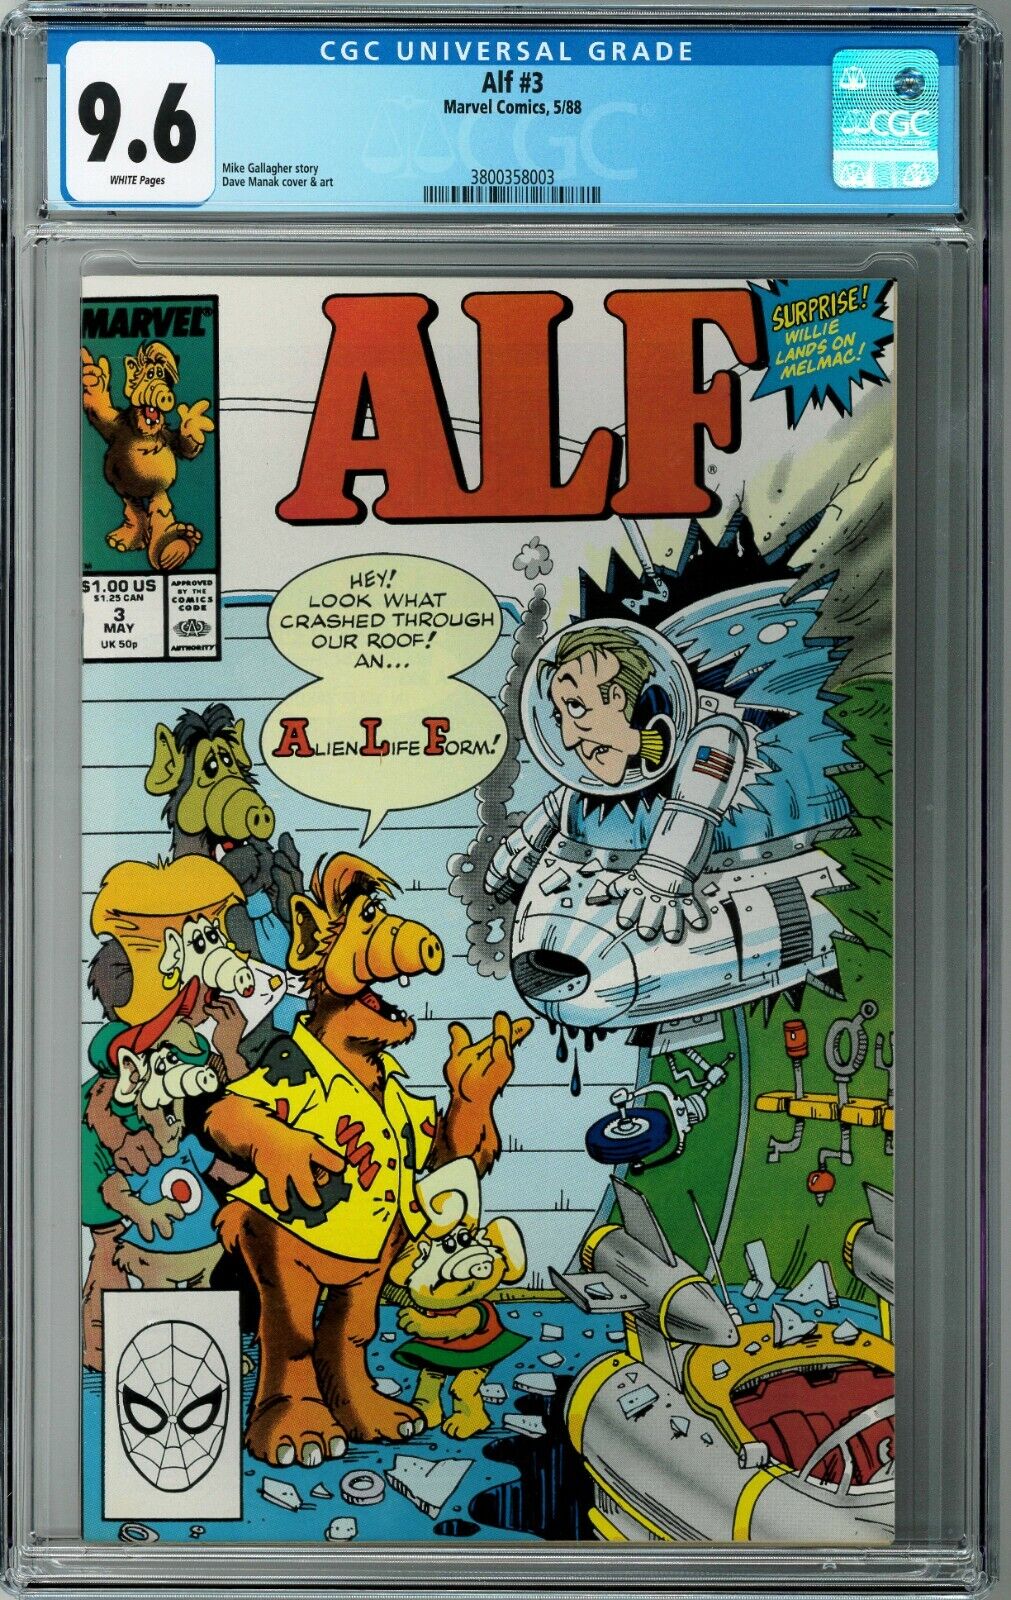 ALF #3 CGC 9.6 (May 1988, Marvel) Dave Manak cover, white pgs., Willie on Melmac